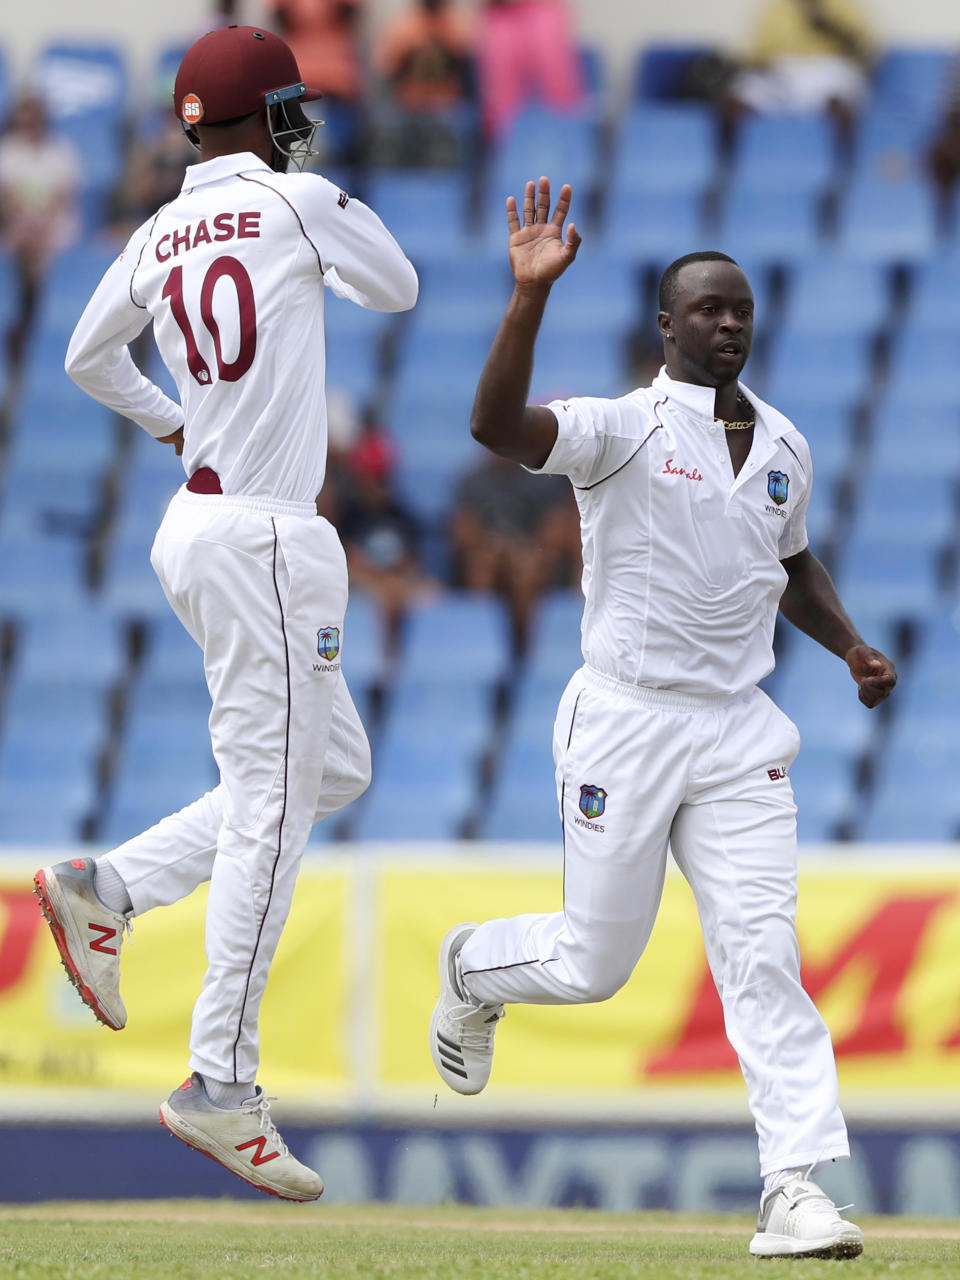 West Indies' bowler Kemar Roach celebrates with teammate Roston Chase the dismissal of India's Cheteshwar Pujara during day one of the first Test cricket match at the Sir Vivian Richards cricket ground in North Sound, Antigua and Barbuda, Thursday, Aug. 22, 2019. (AP Photo/Ricardo Mazalan)